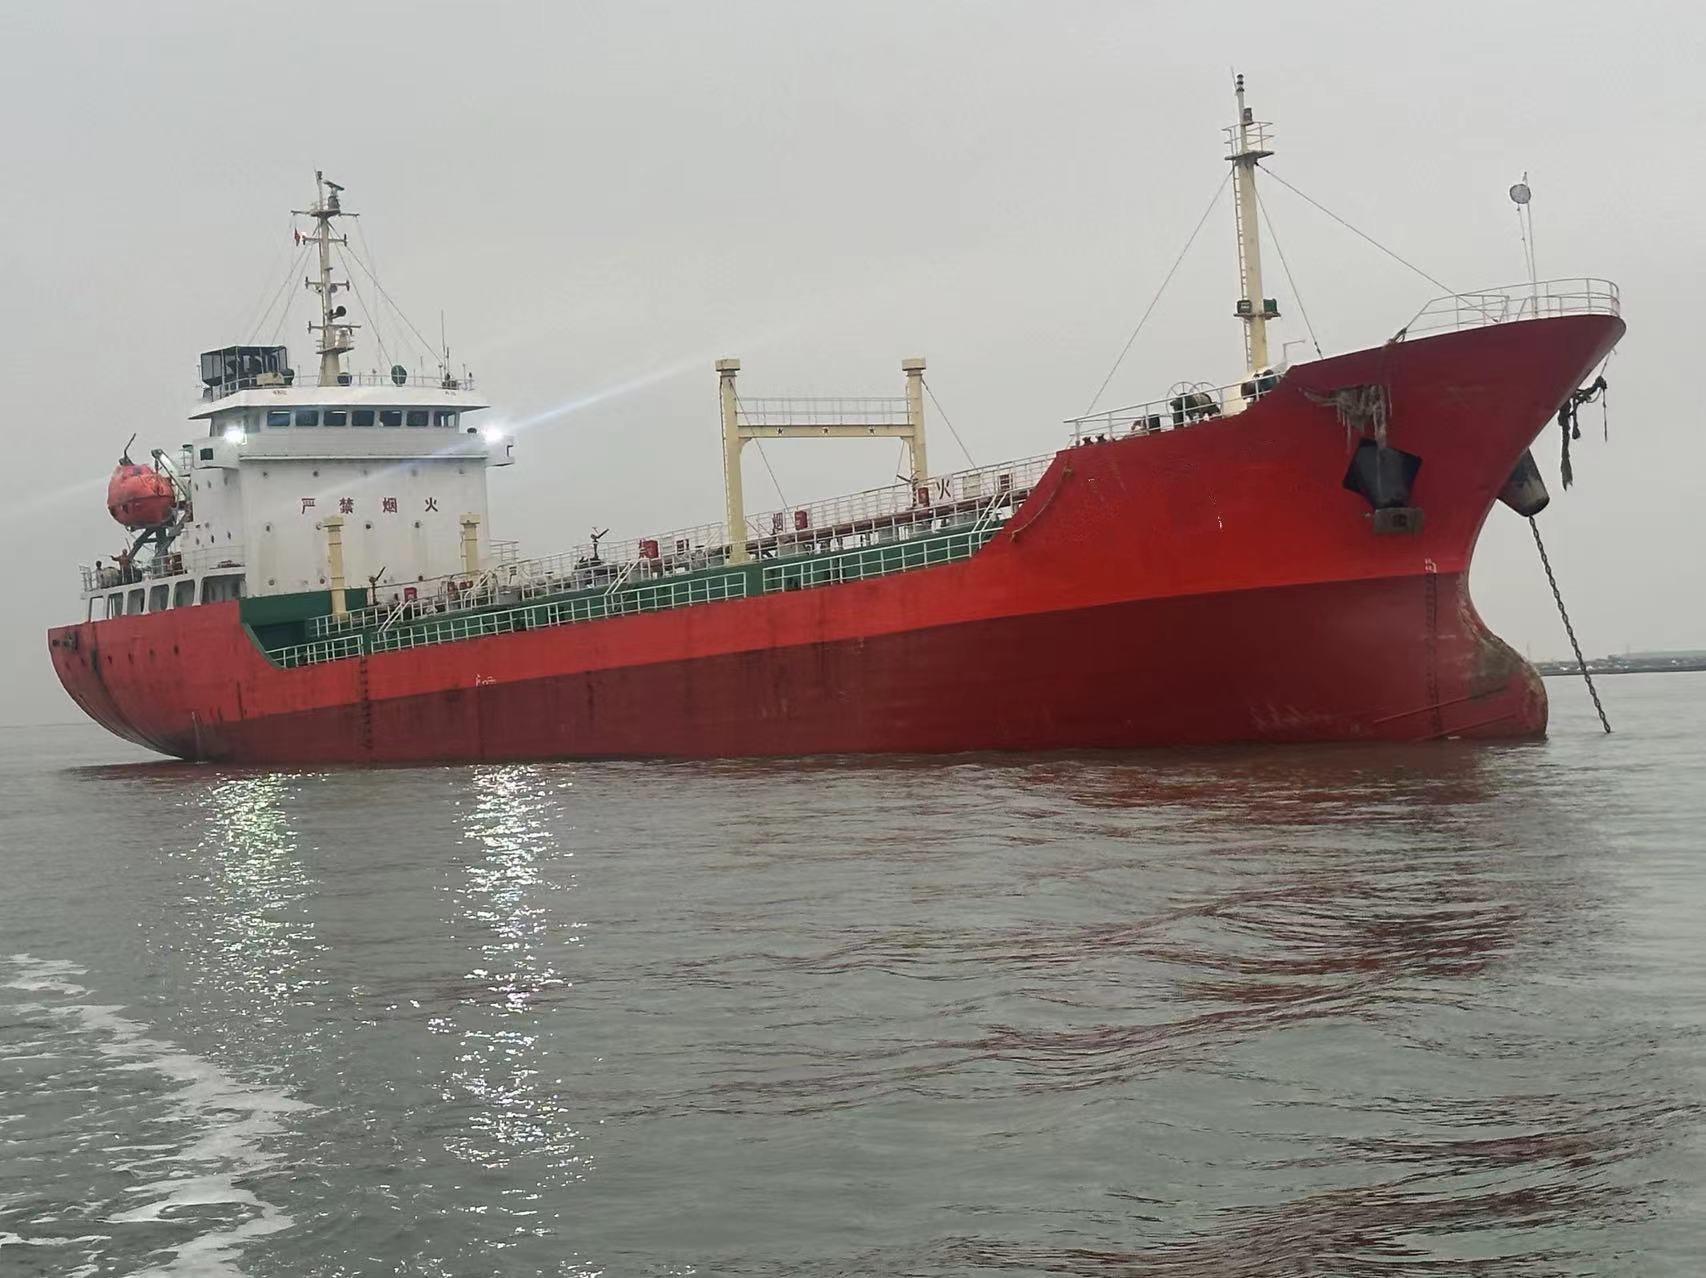 4770 T Product Oil Tanker For Sale